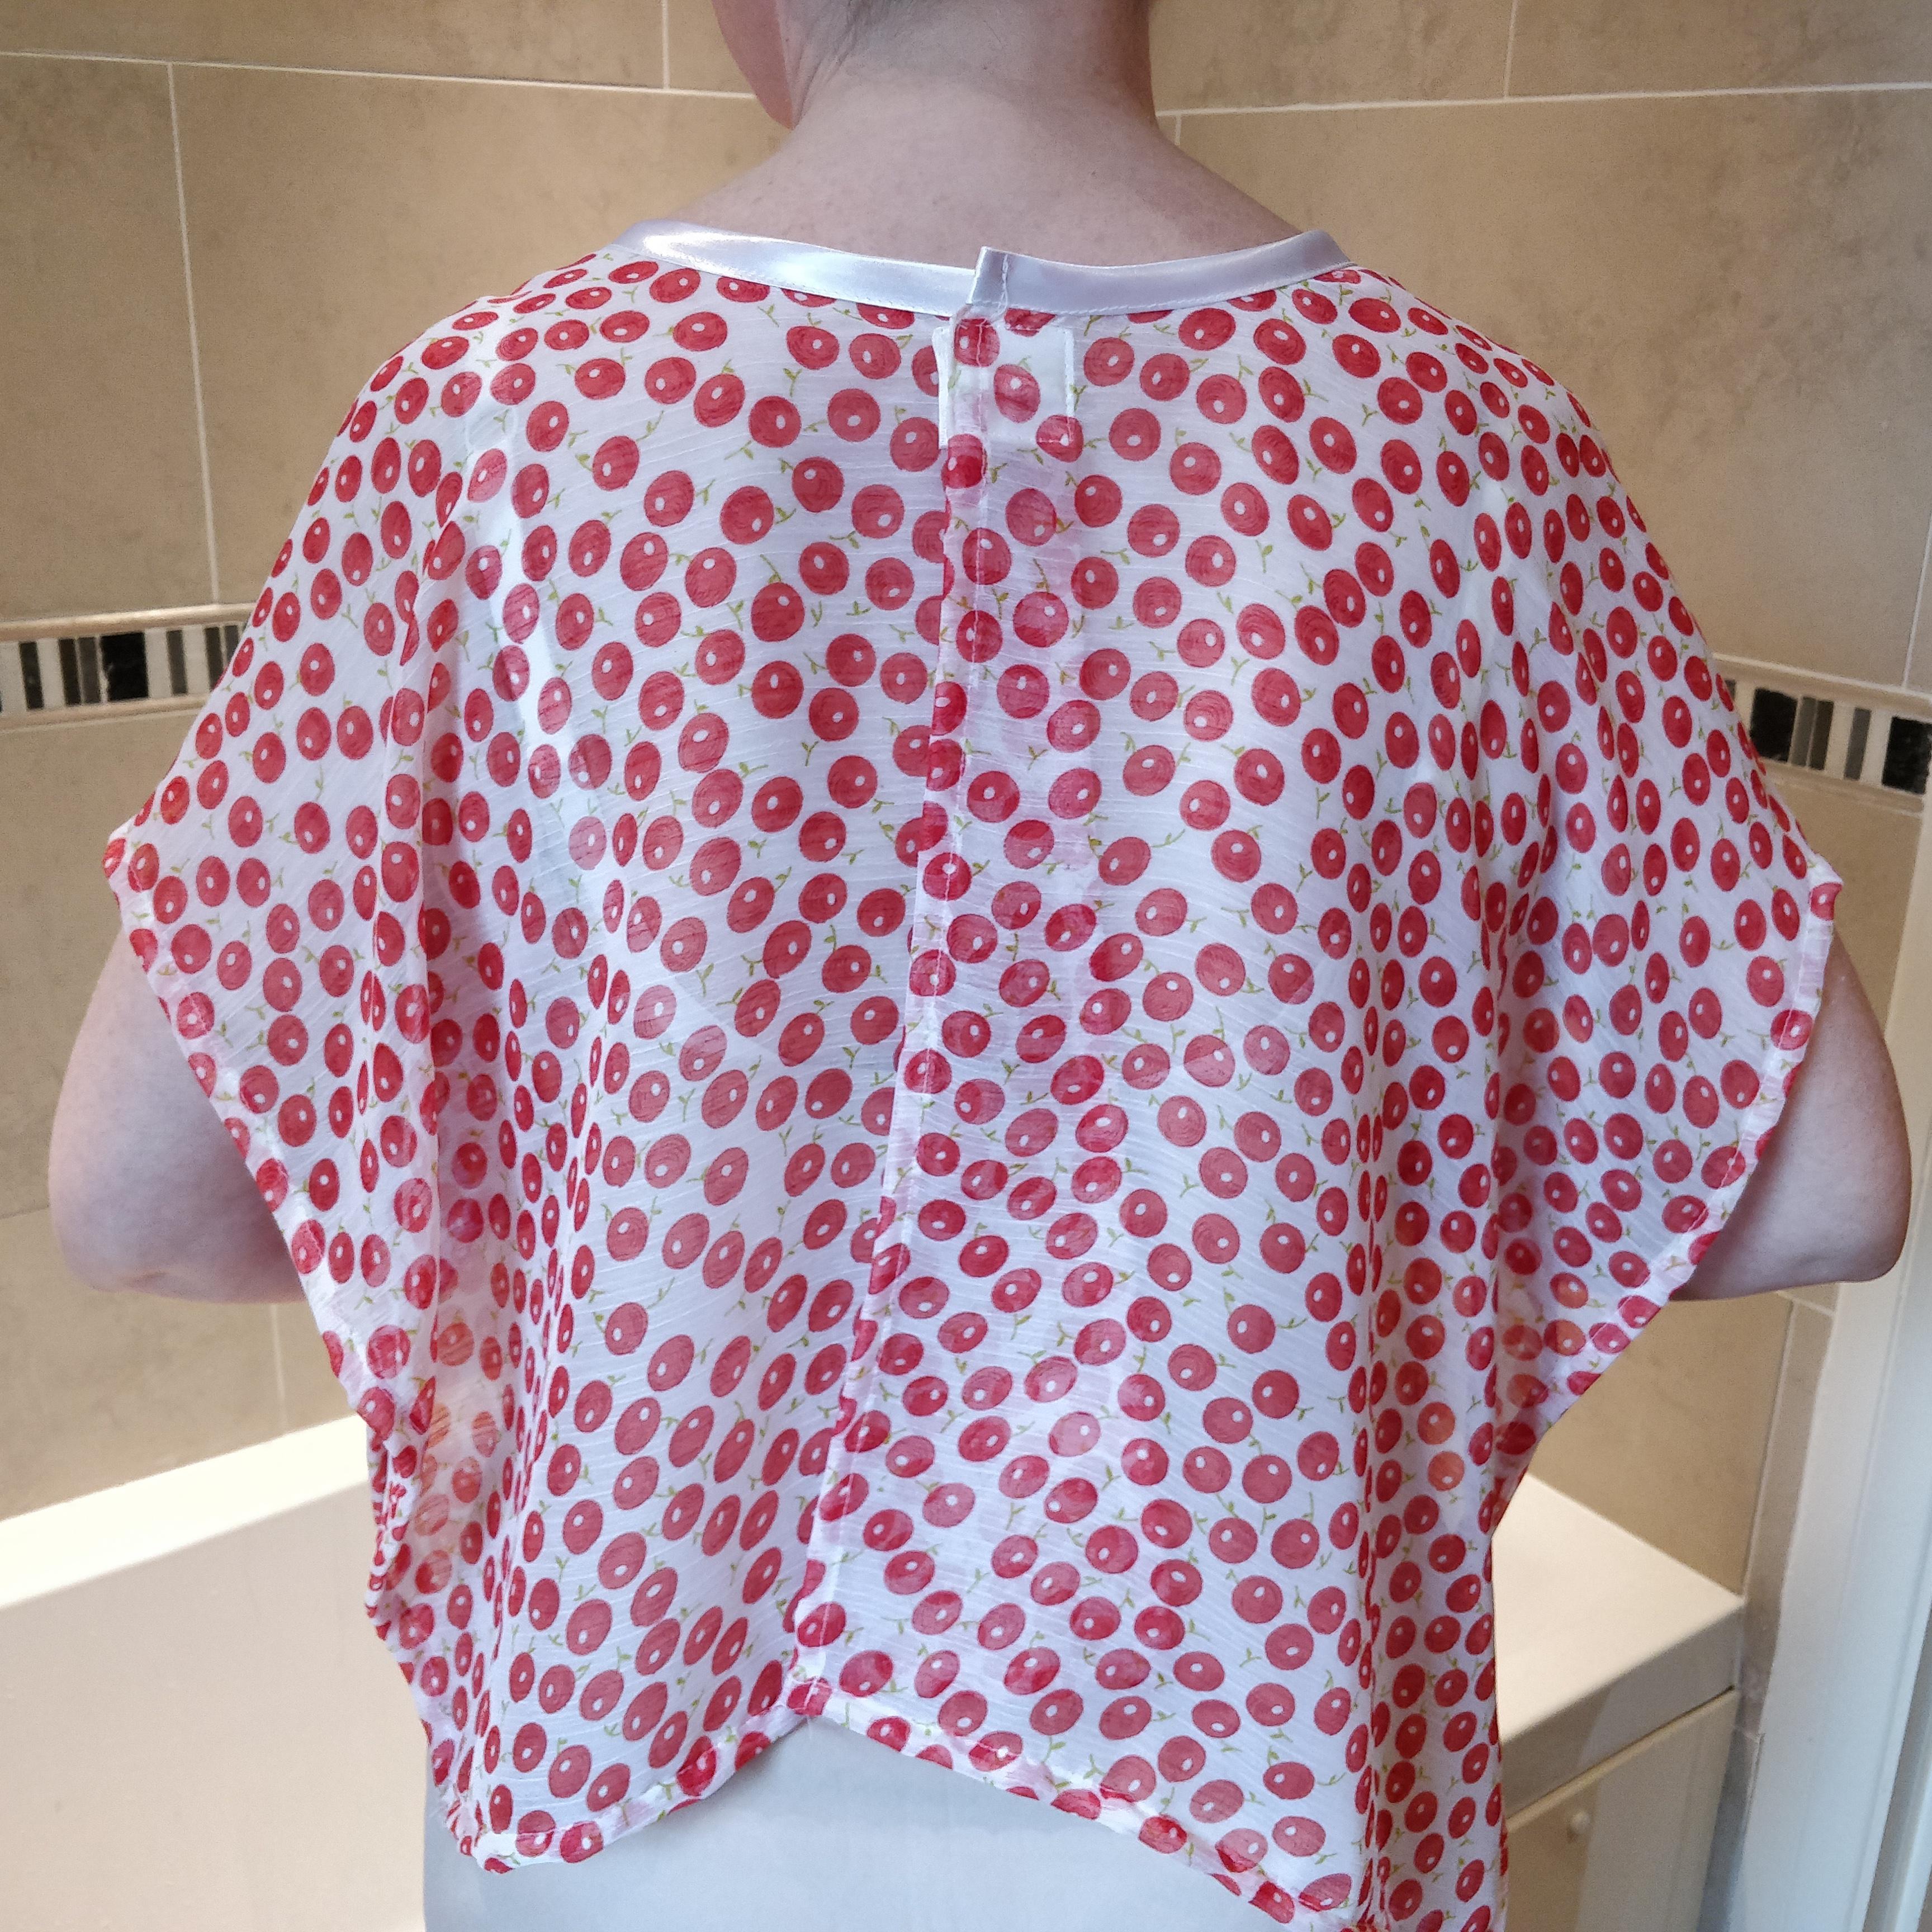 Soft Red NeverNaked(tm) Shower Drapron® showing the back view - Drapronr comes down to approximatley waist level and fastens at the back with a magnetic fastening